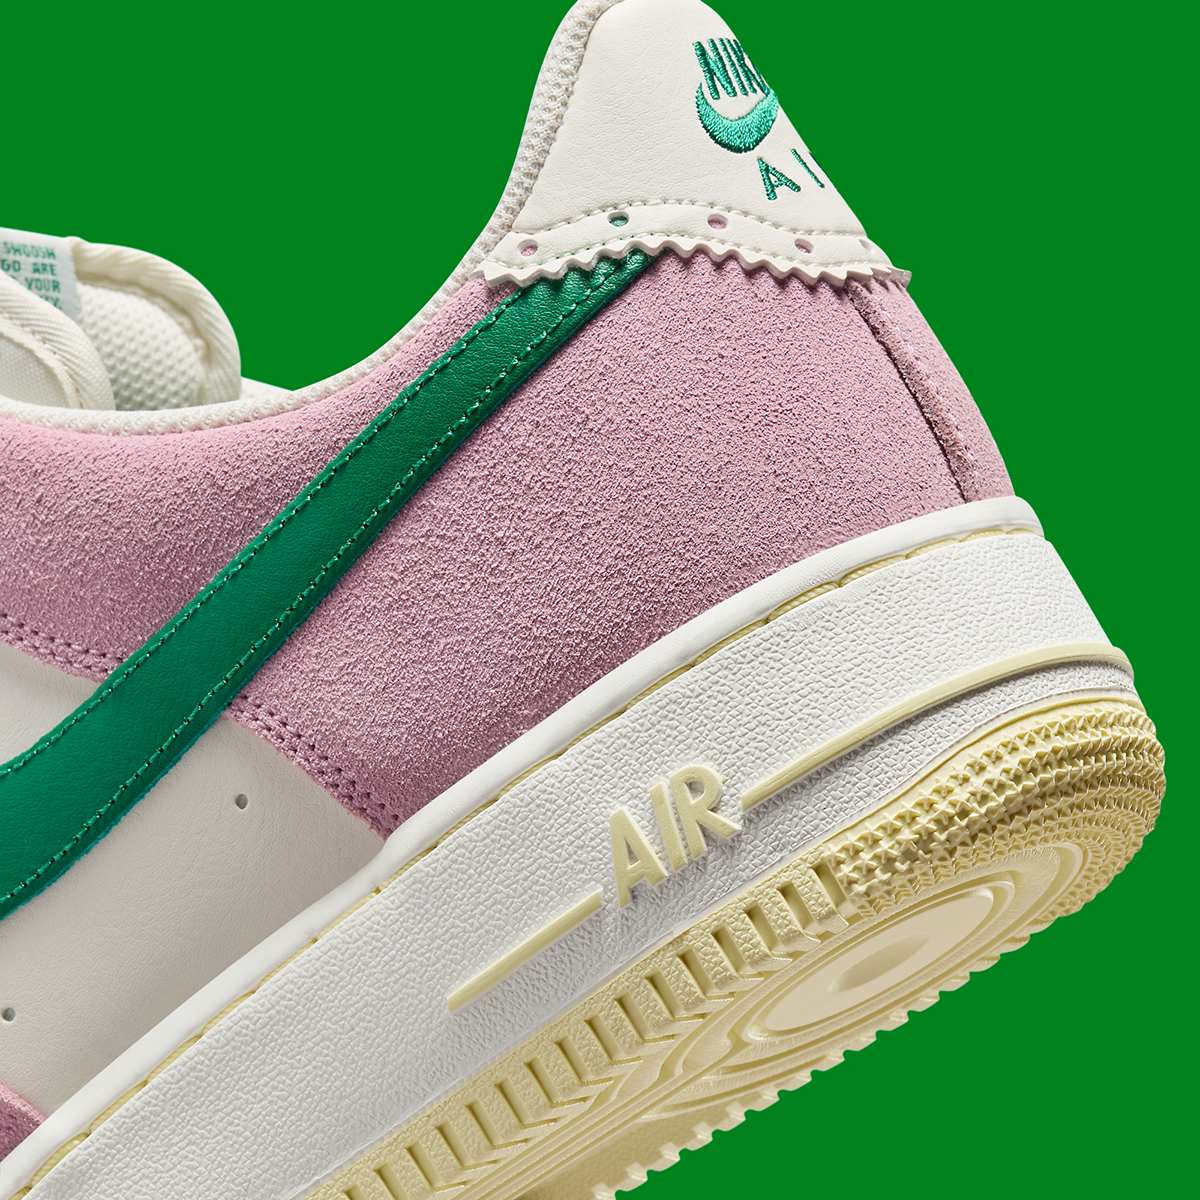 nike eggs nike eggs roshe run mens with red spits on legs back Low Sail Malachite Soft Pink Alabaster Fv9346 100 2